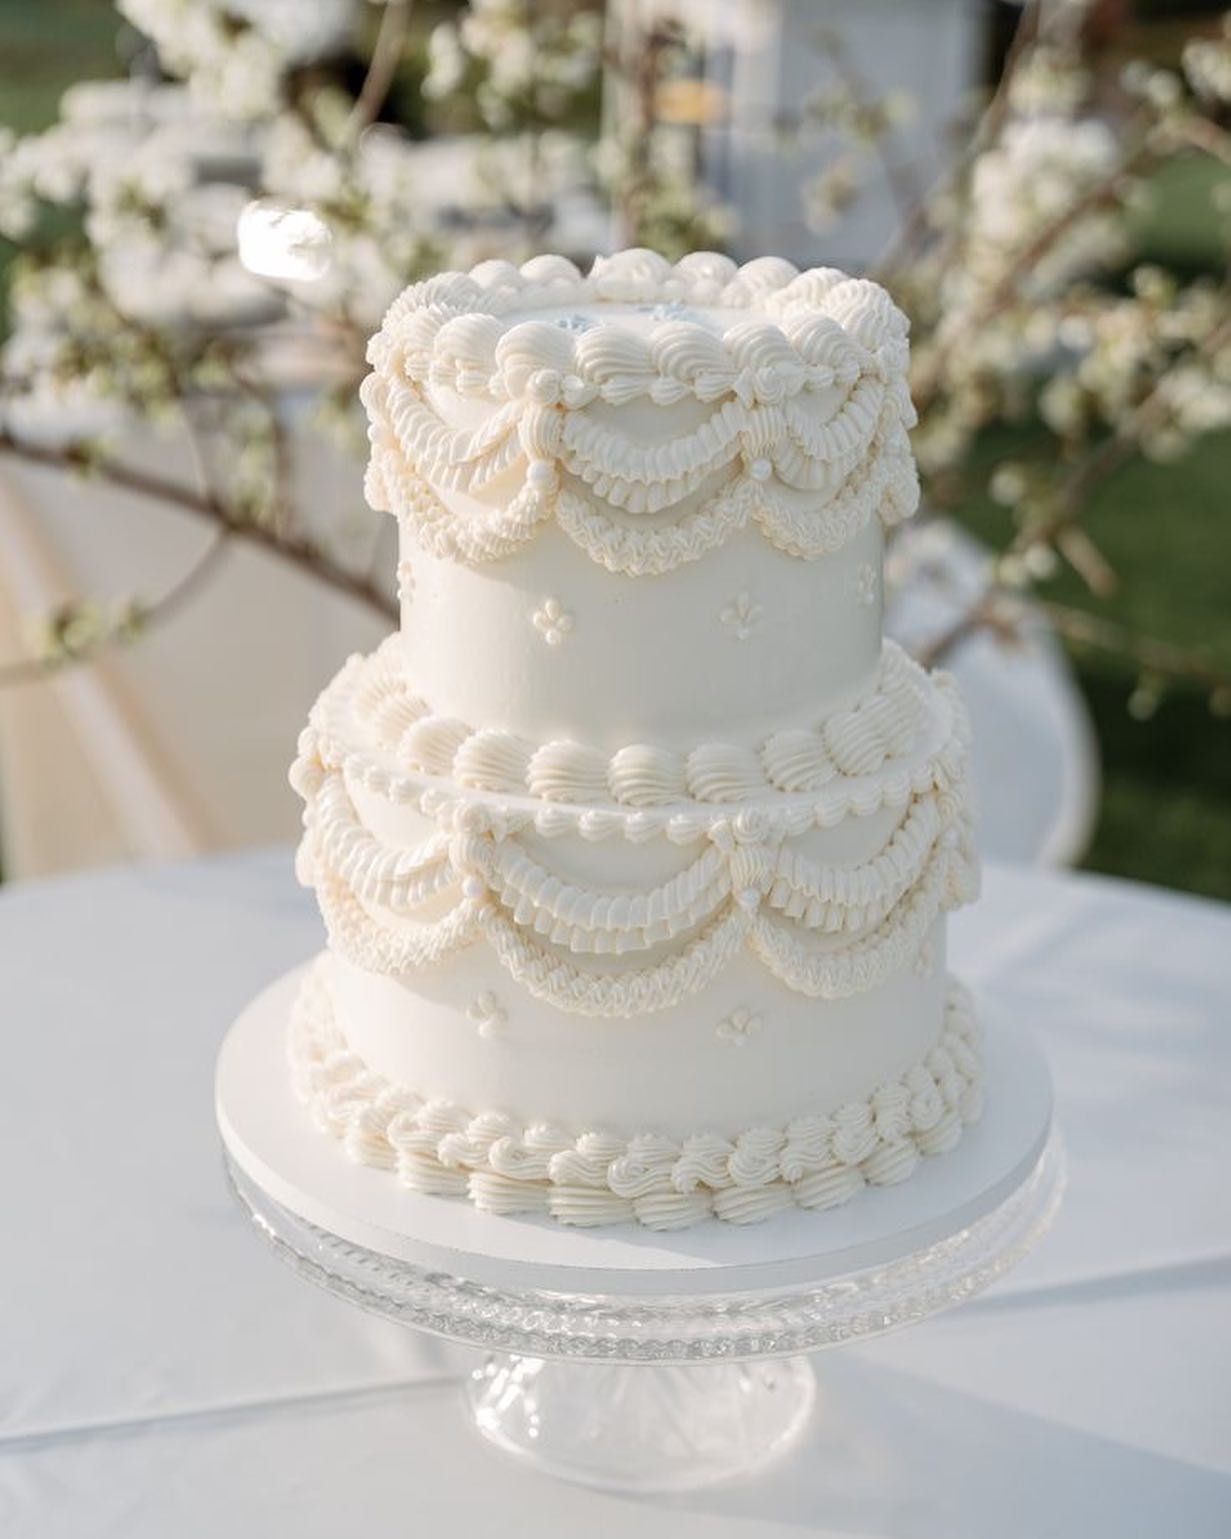 Trending now: vintage wedding cakes 😍 what do you think, do you love it?